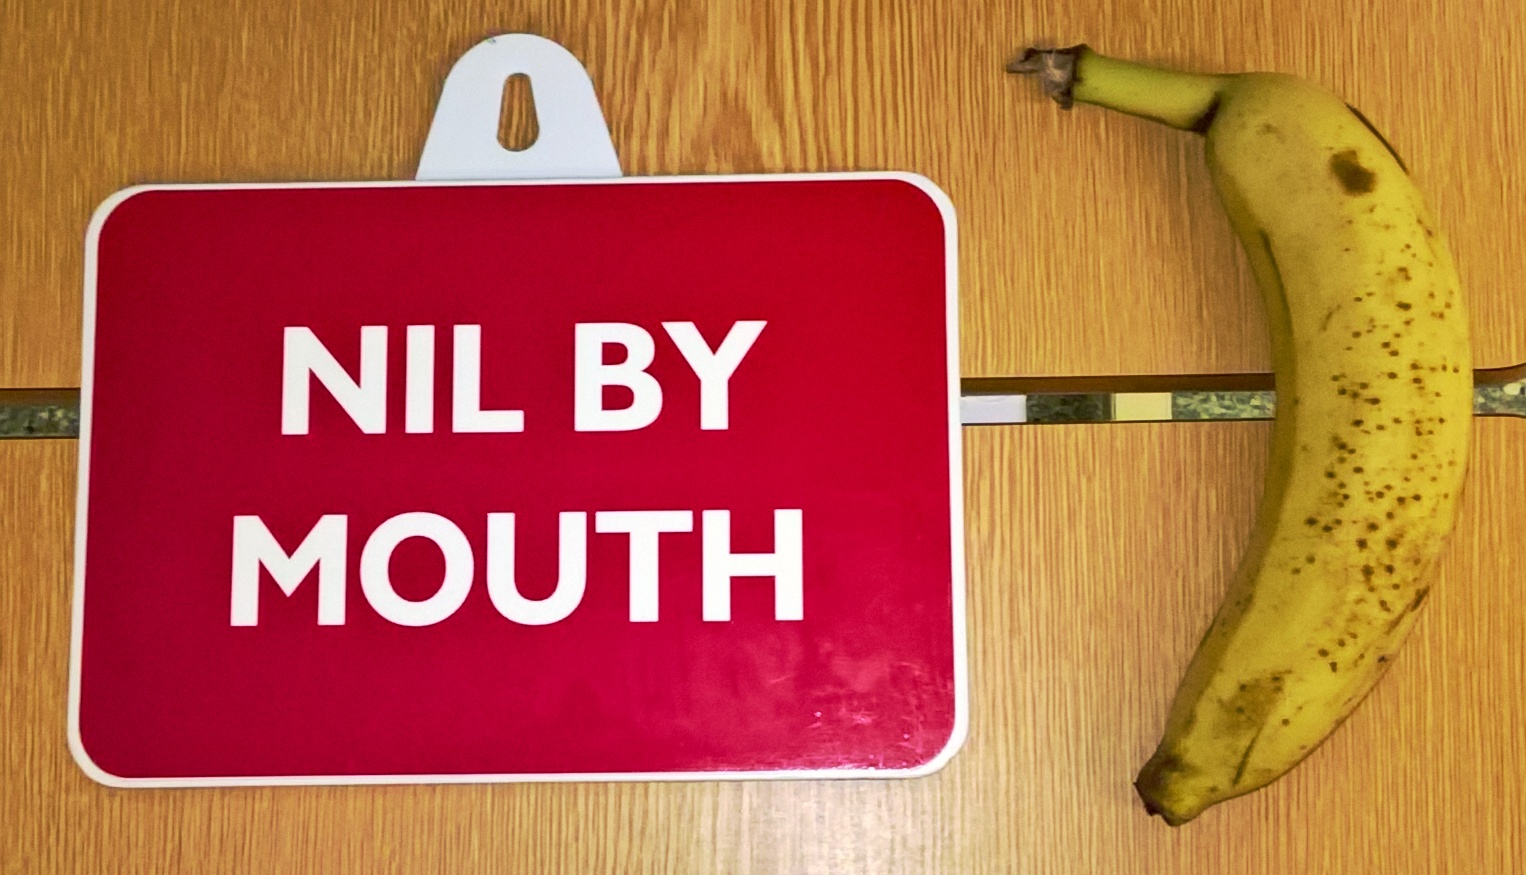 Nil by mouth with banana